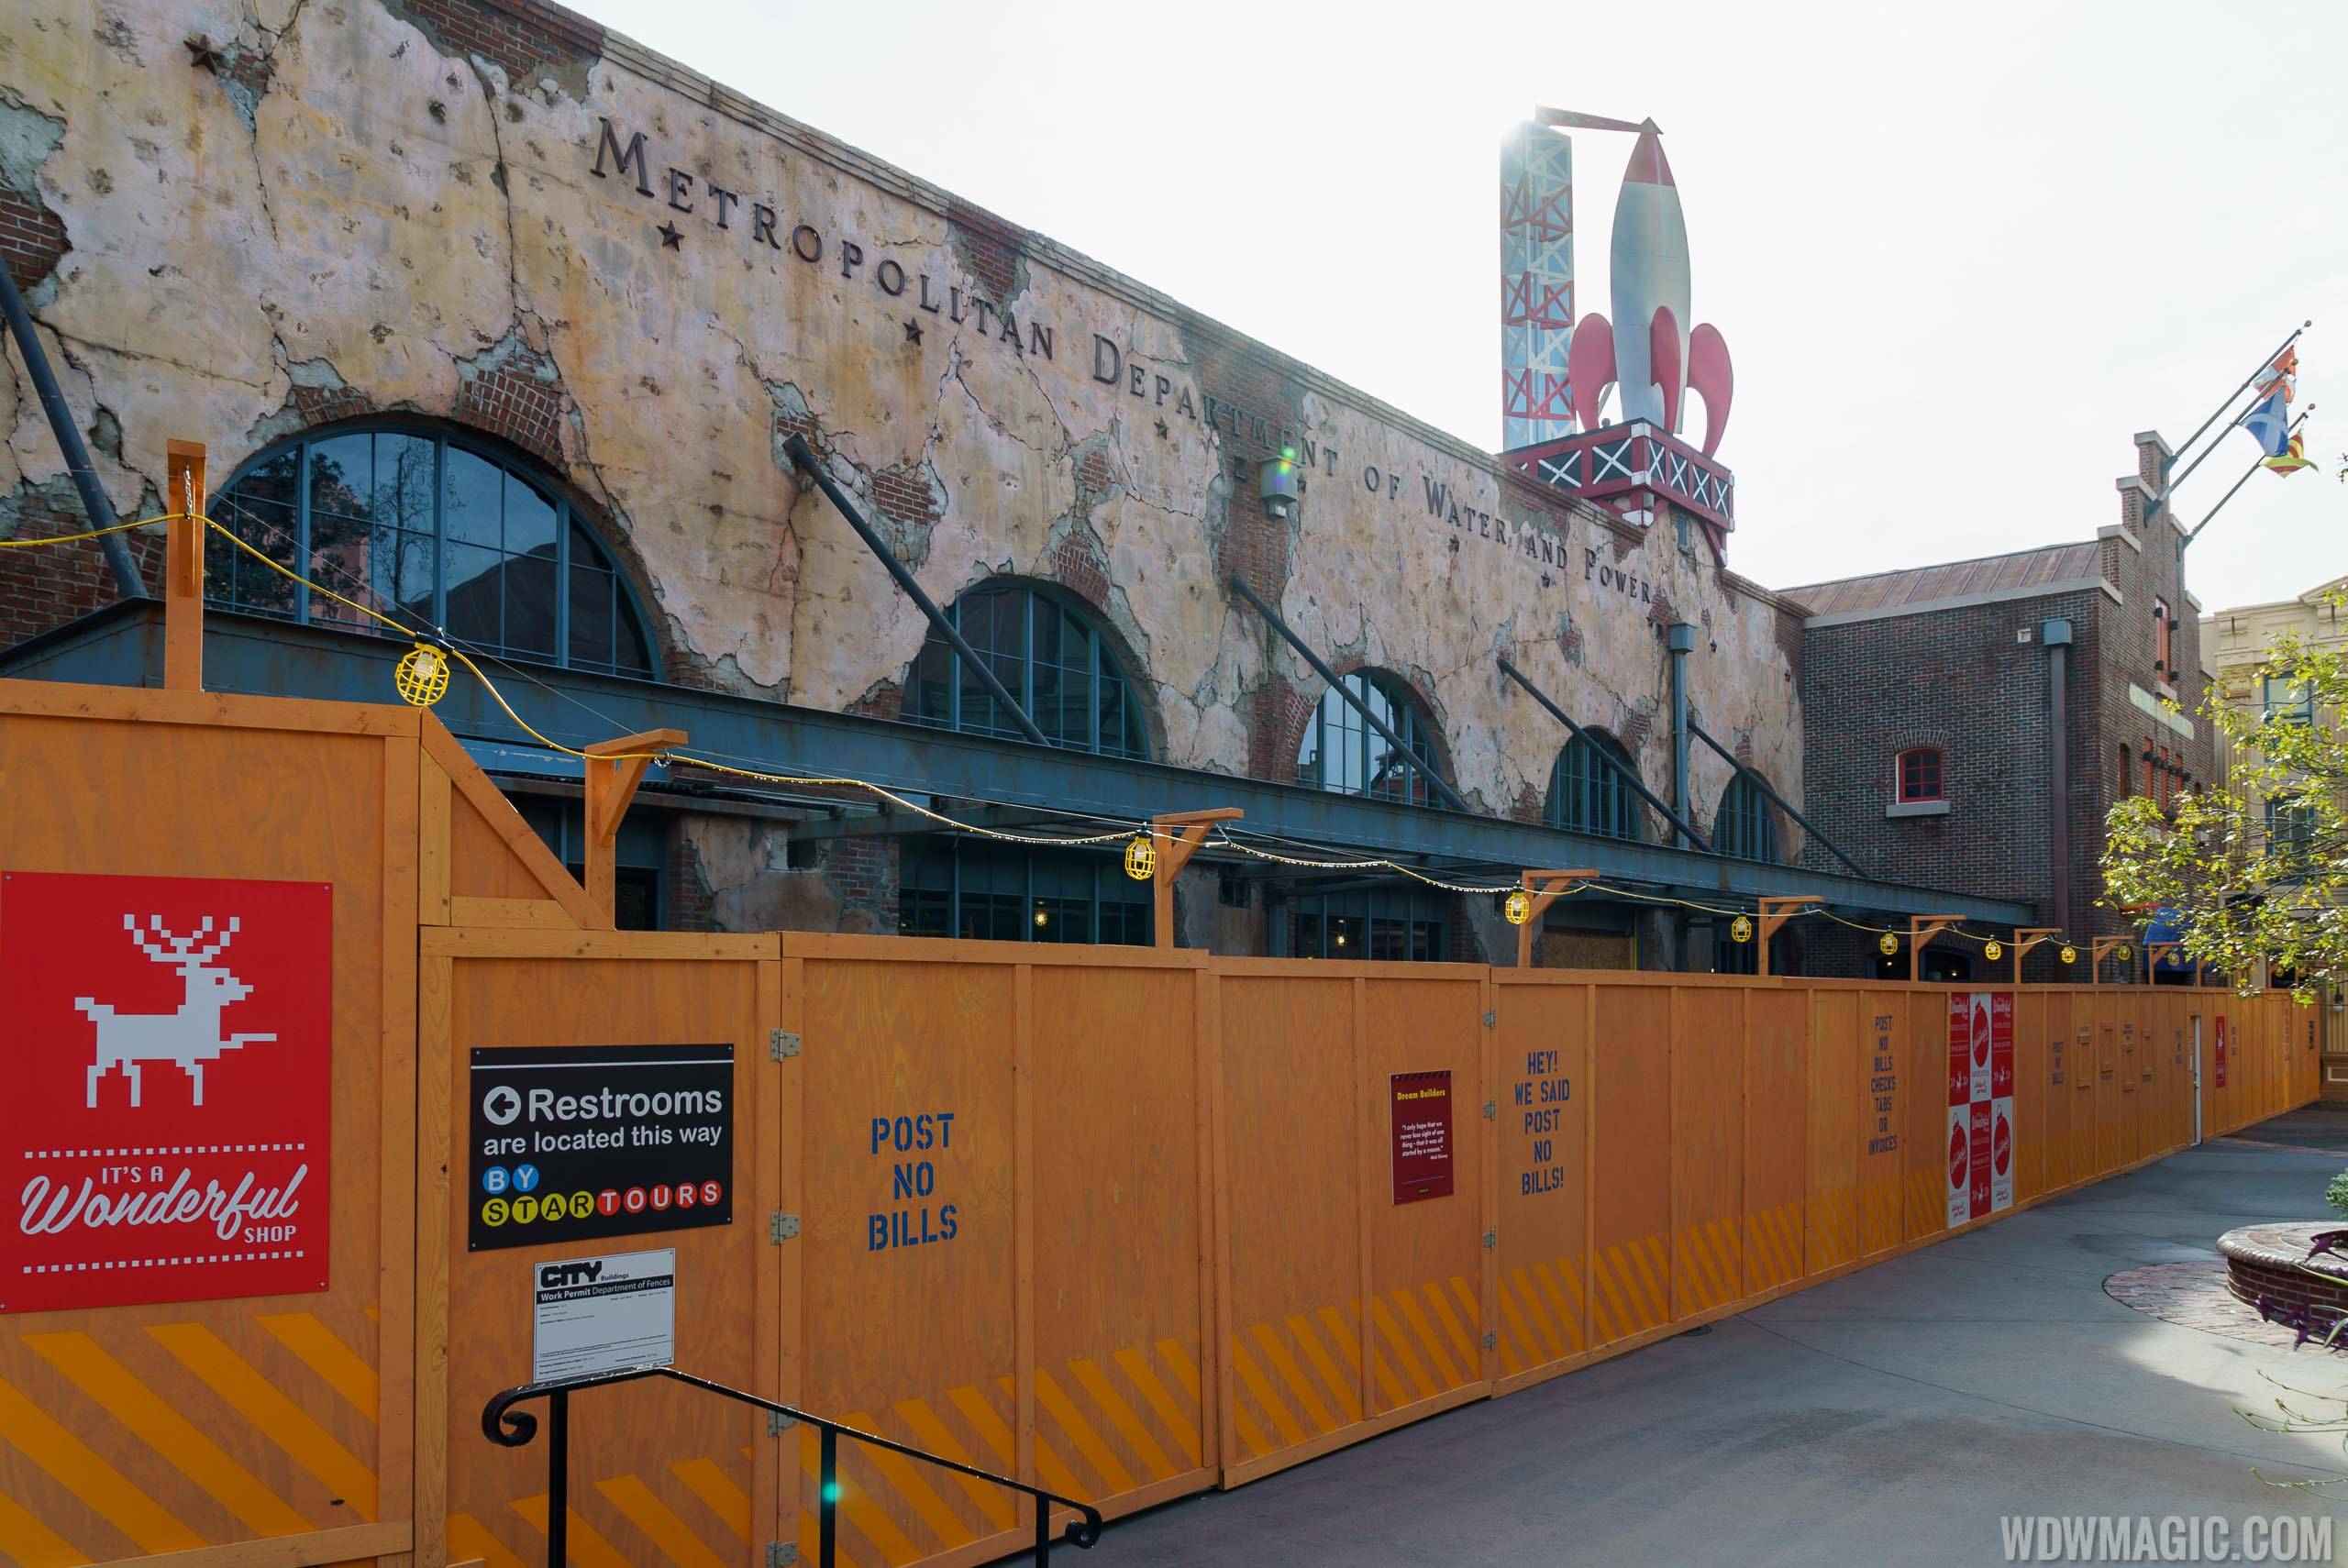 PHOTOS - Latest look at the Pizza Planet refurbishment